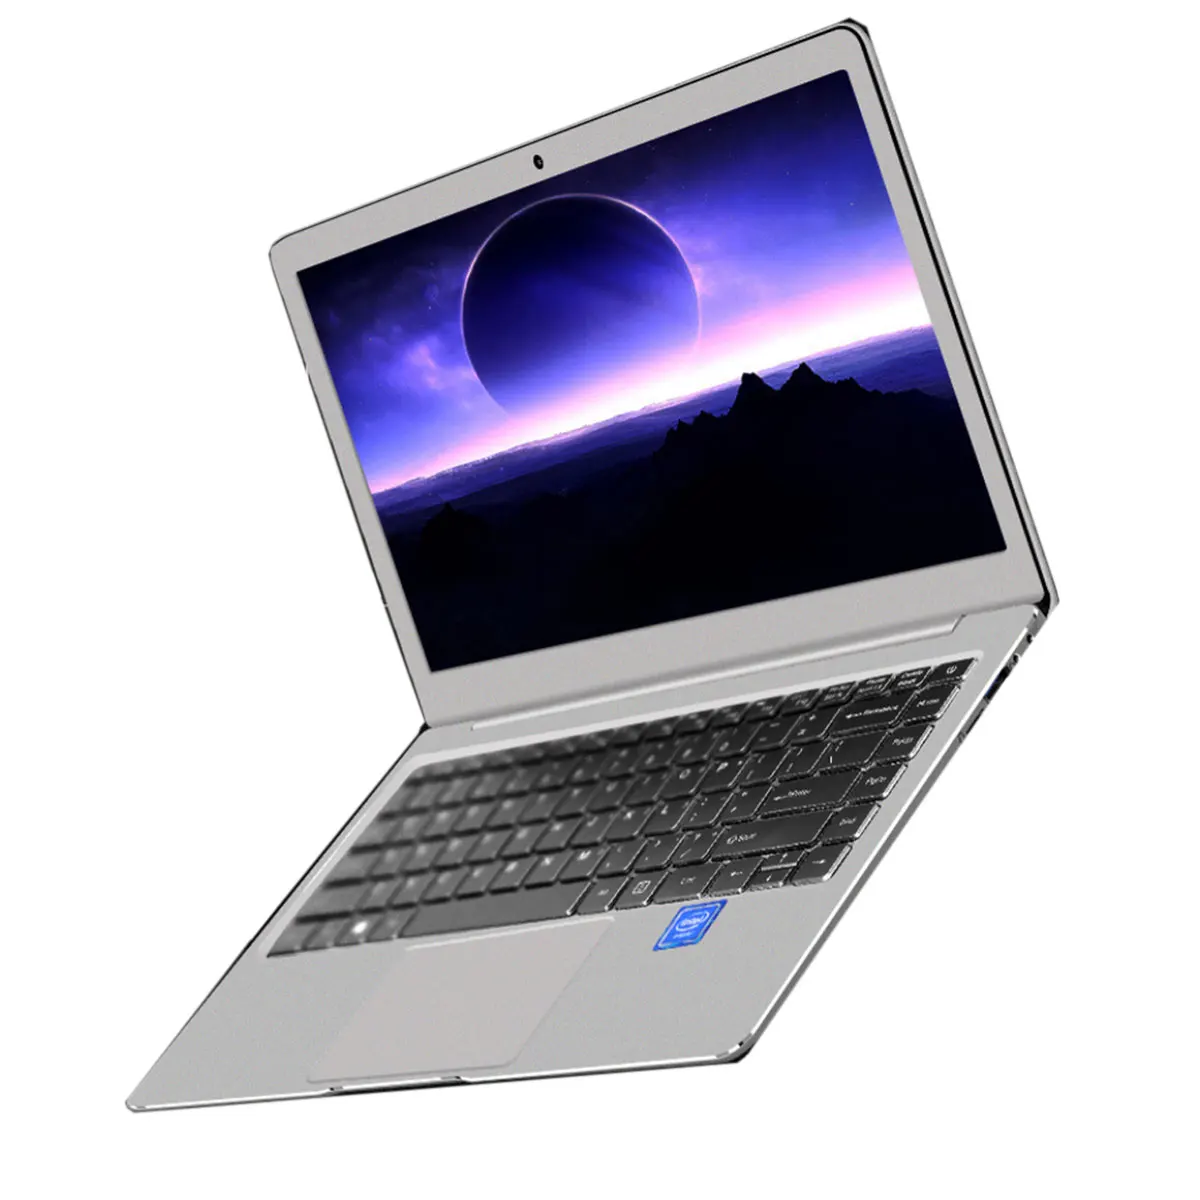 

Cheap Chinese Laptops N3350 14 inch 6GB RAM 64GB Win 10 l920*1080 IPS Cheap China Children Education Computer Laptops, Silver